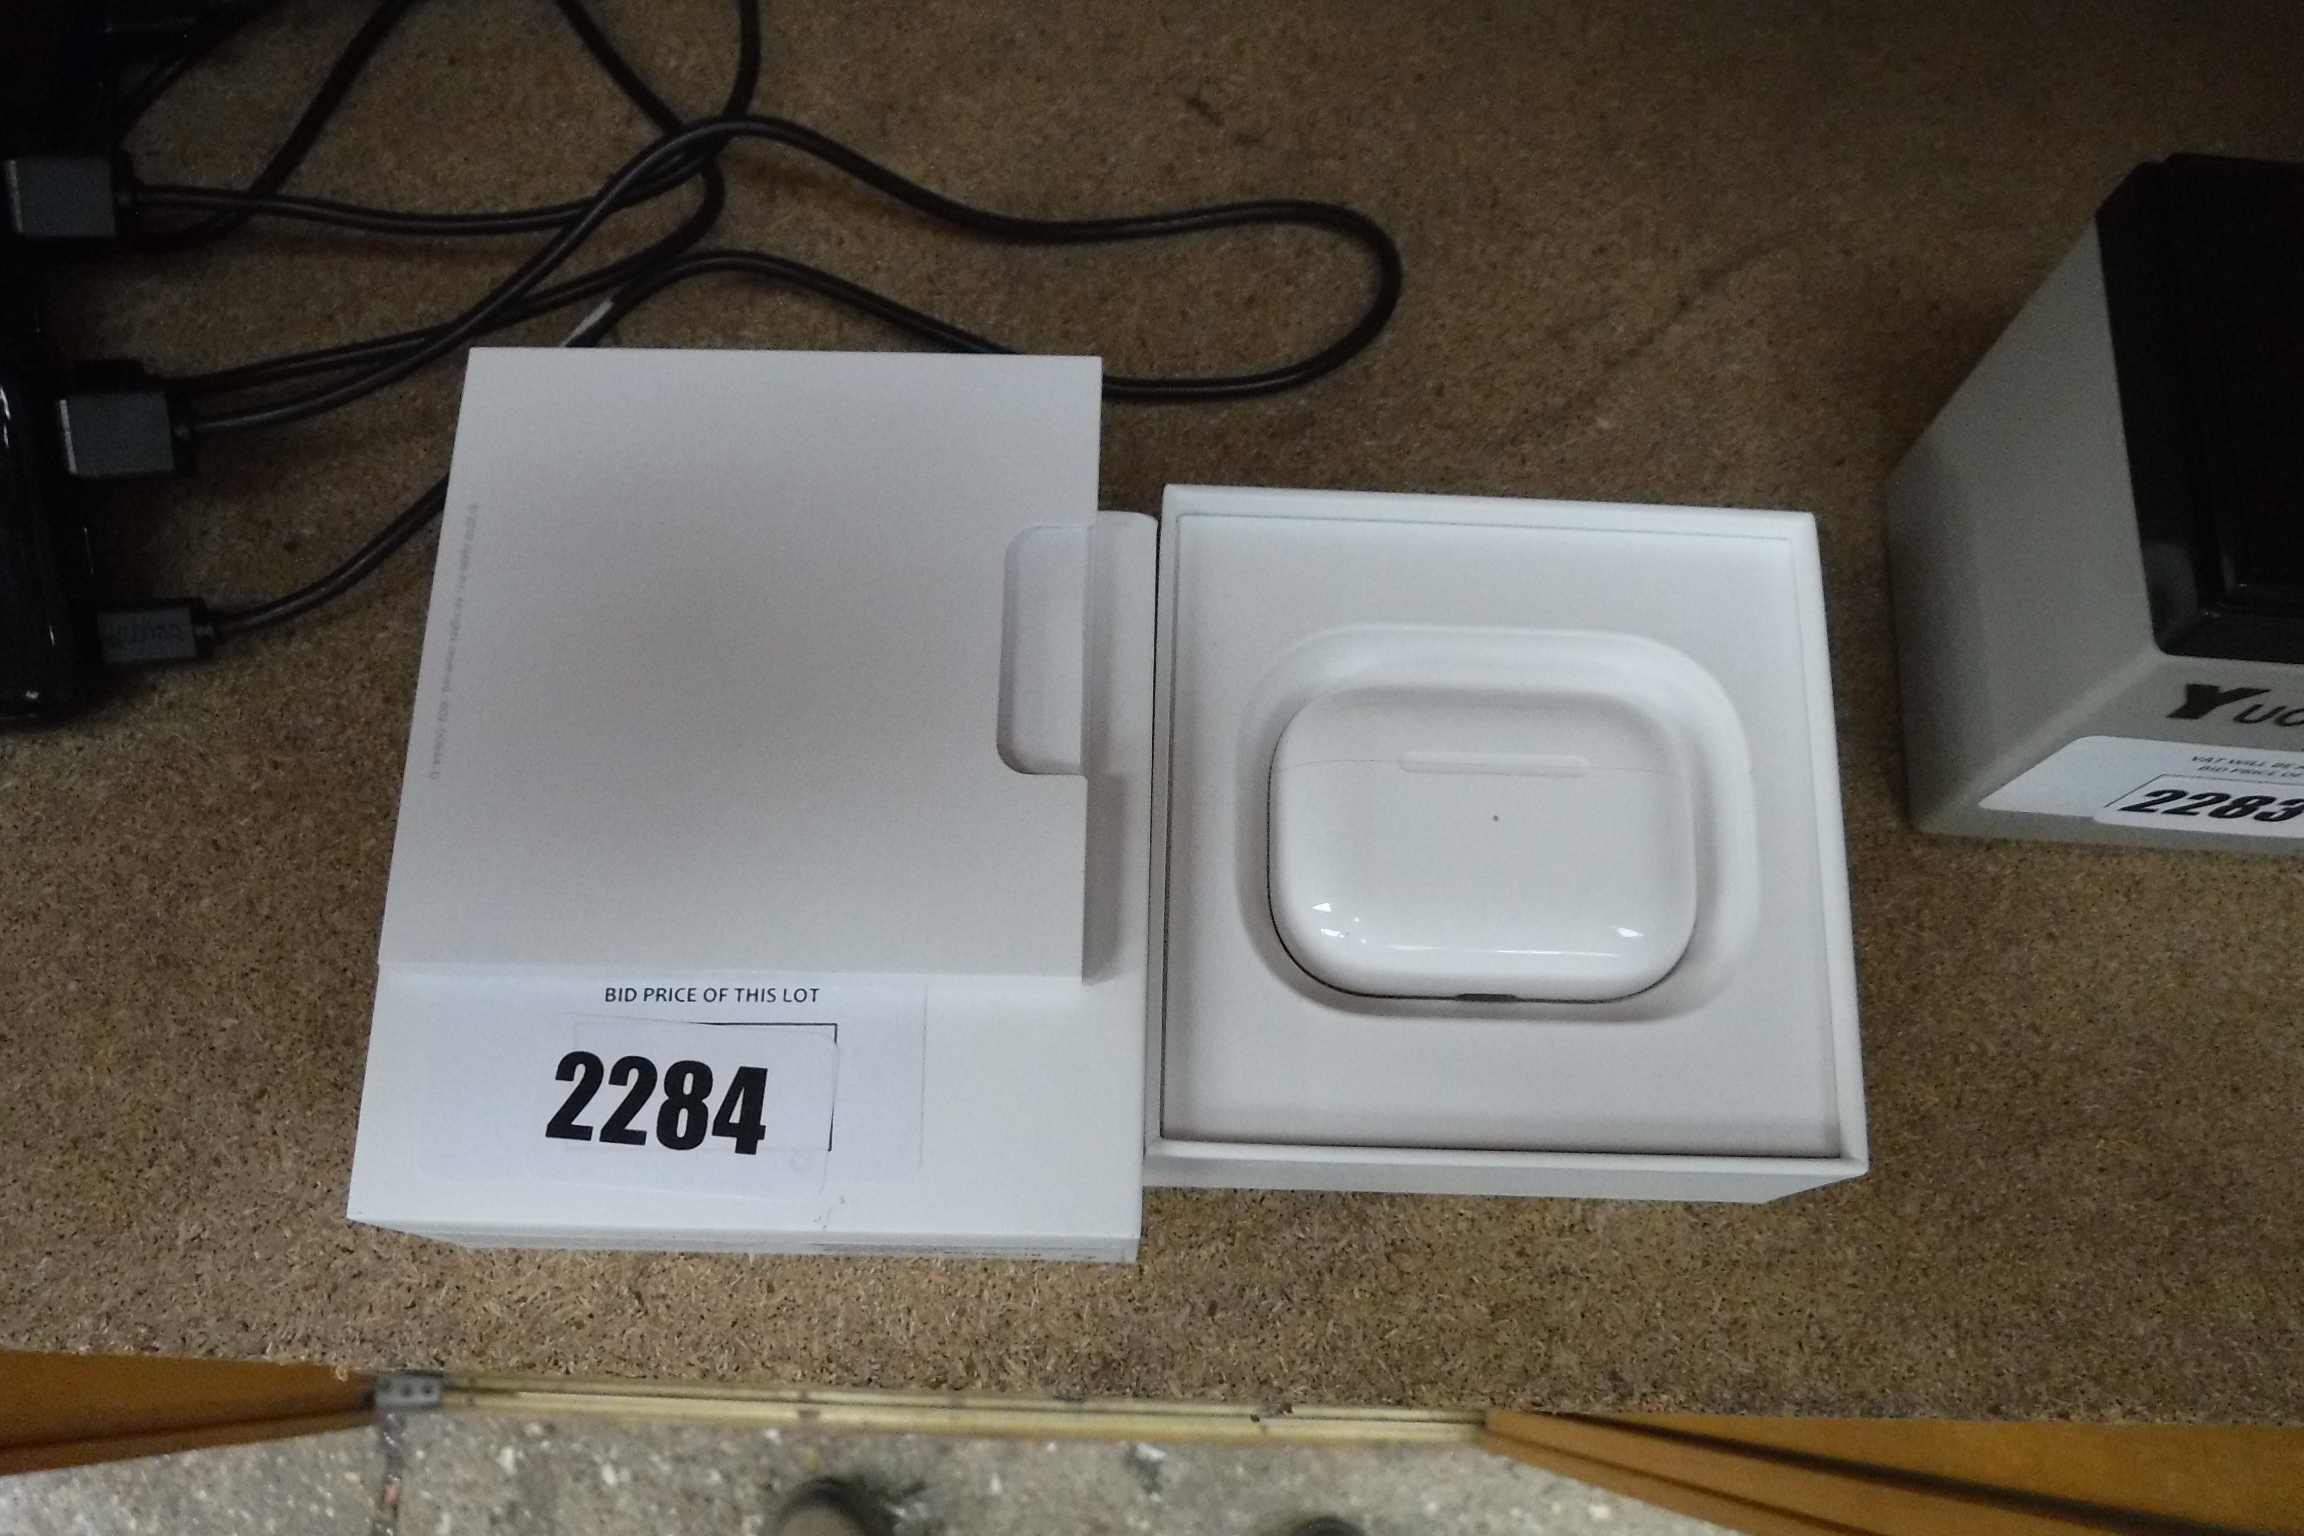 (2511) Boxed pair of Apple Airpod Pros